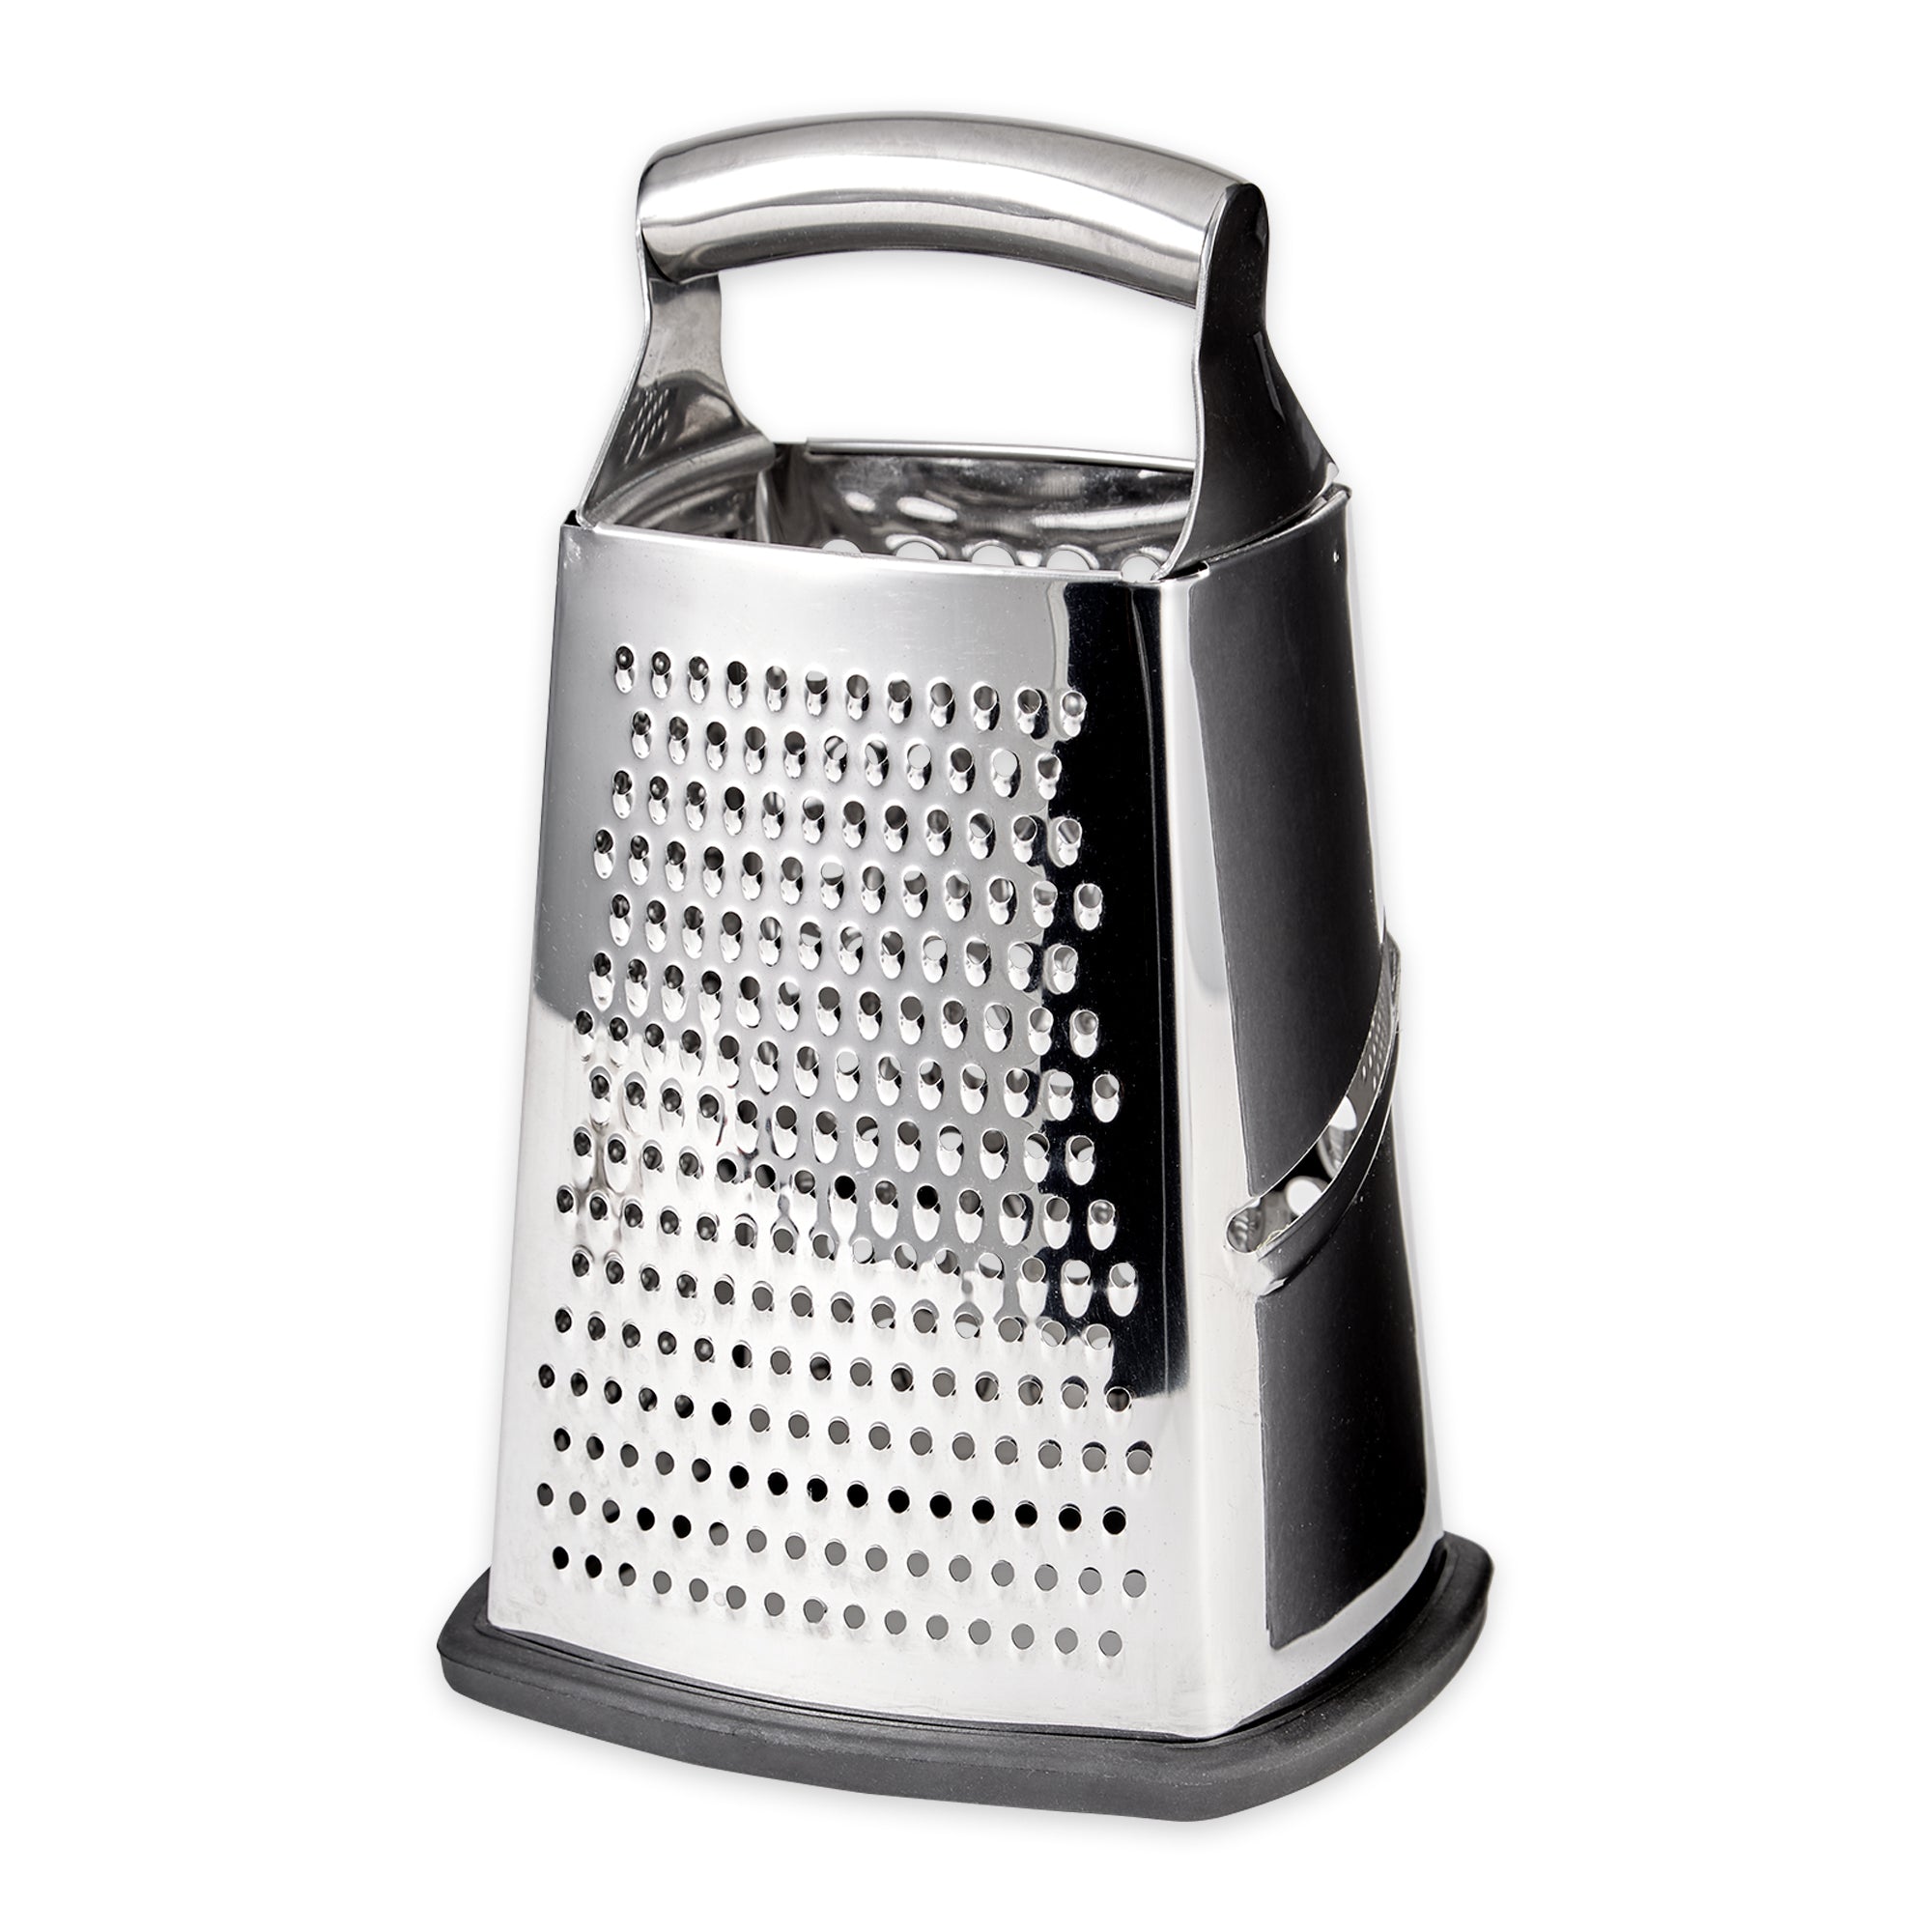 Heavy-duty R.G.V. MAXI VIP 12 G/S Electric Cheese Grater - Stainless Steel  Heavy-duty Drum - 1100W